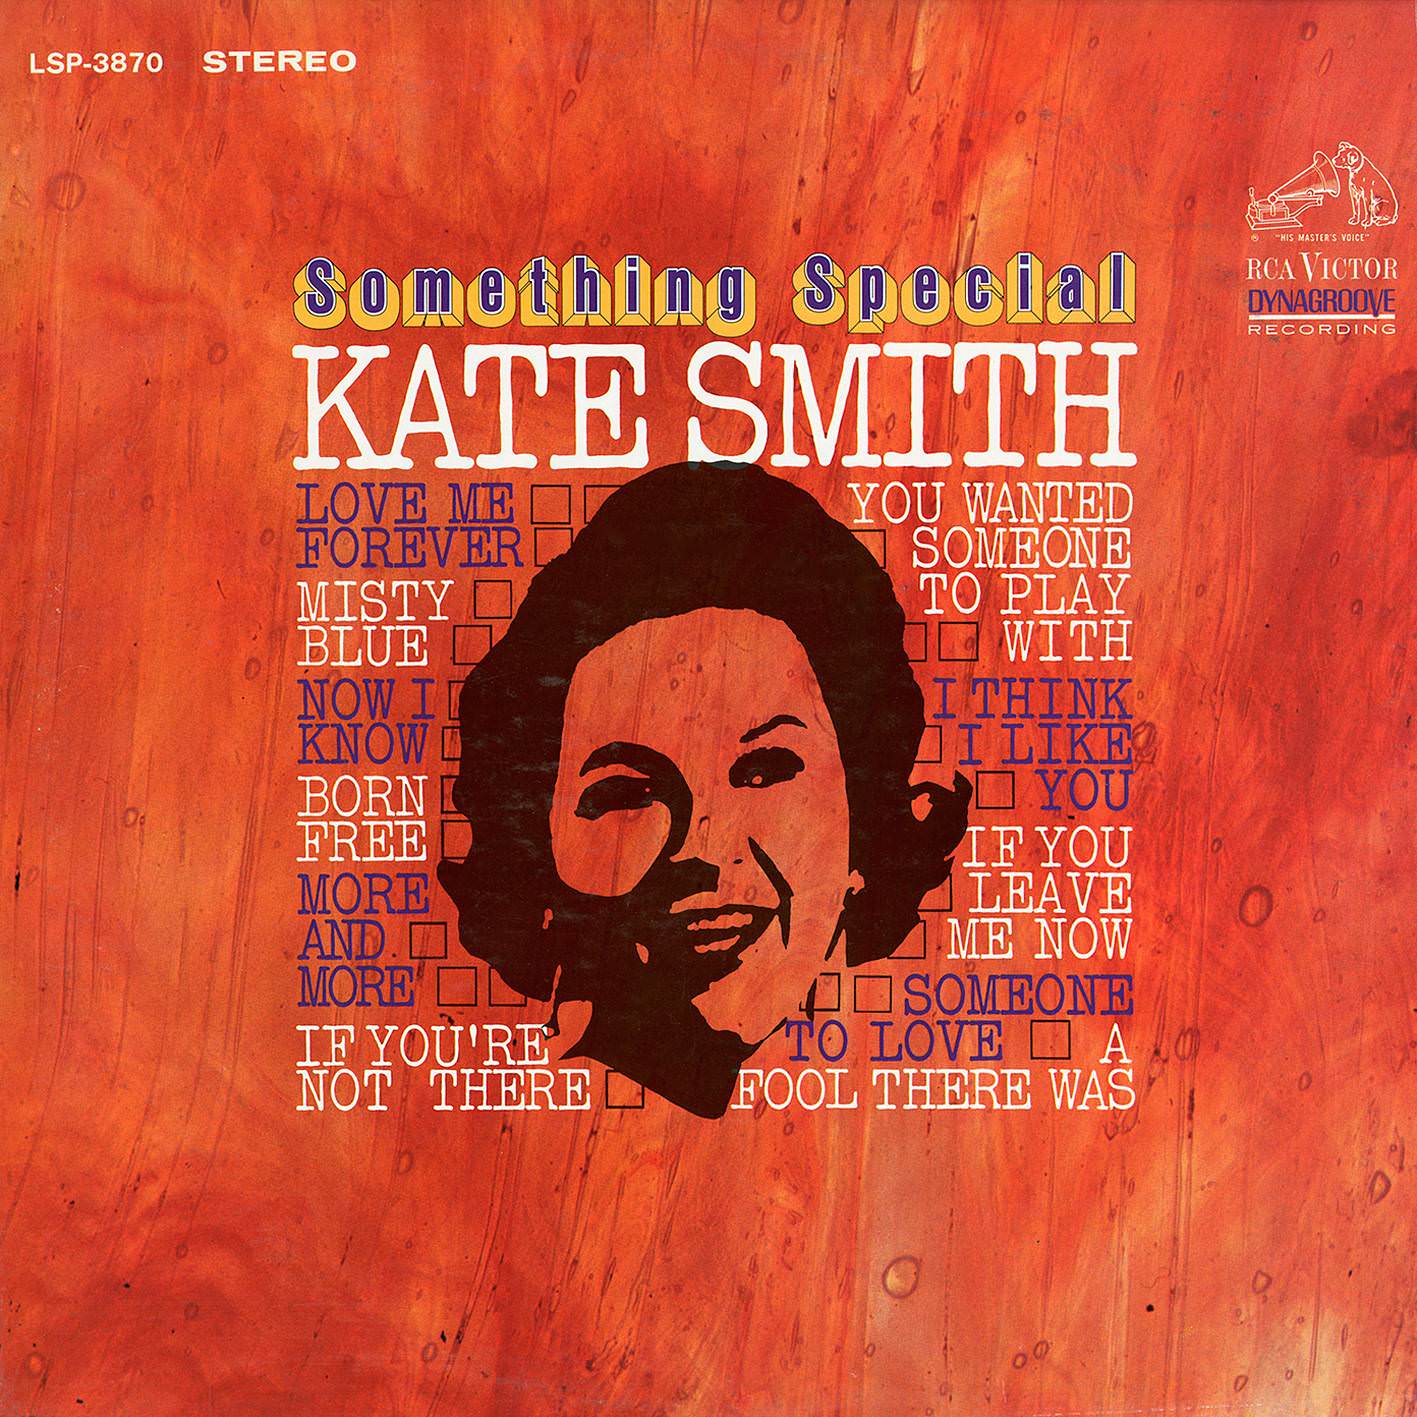 Kate Smith – Something Special (1967/2017) [AcousticSounds FLAC 24bit/192kHz]